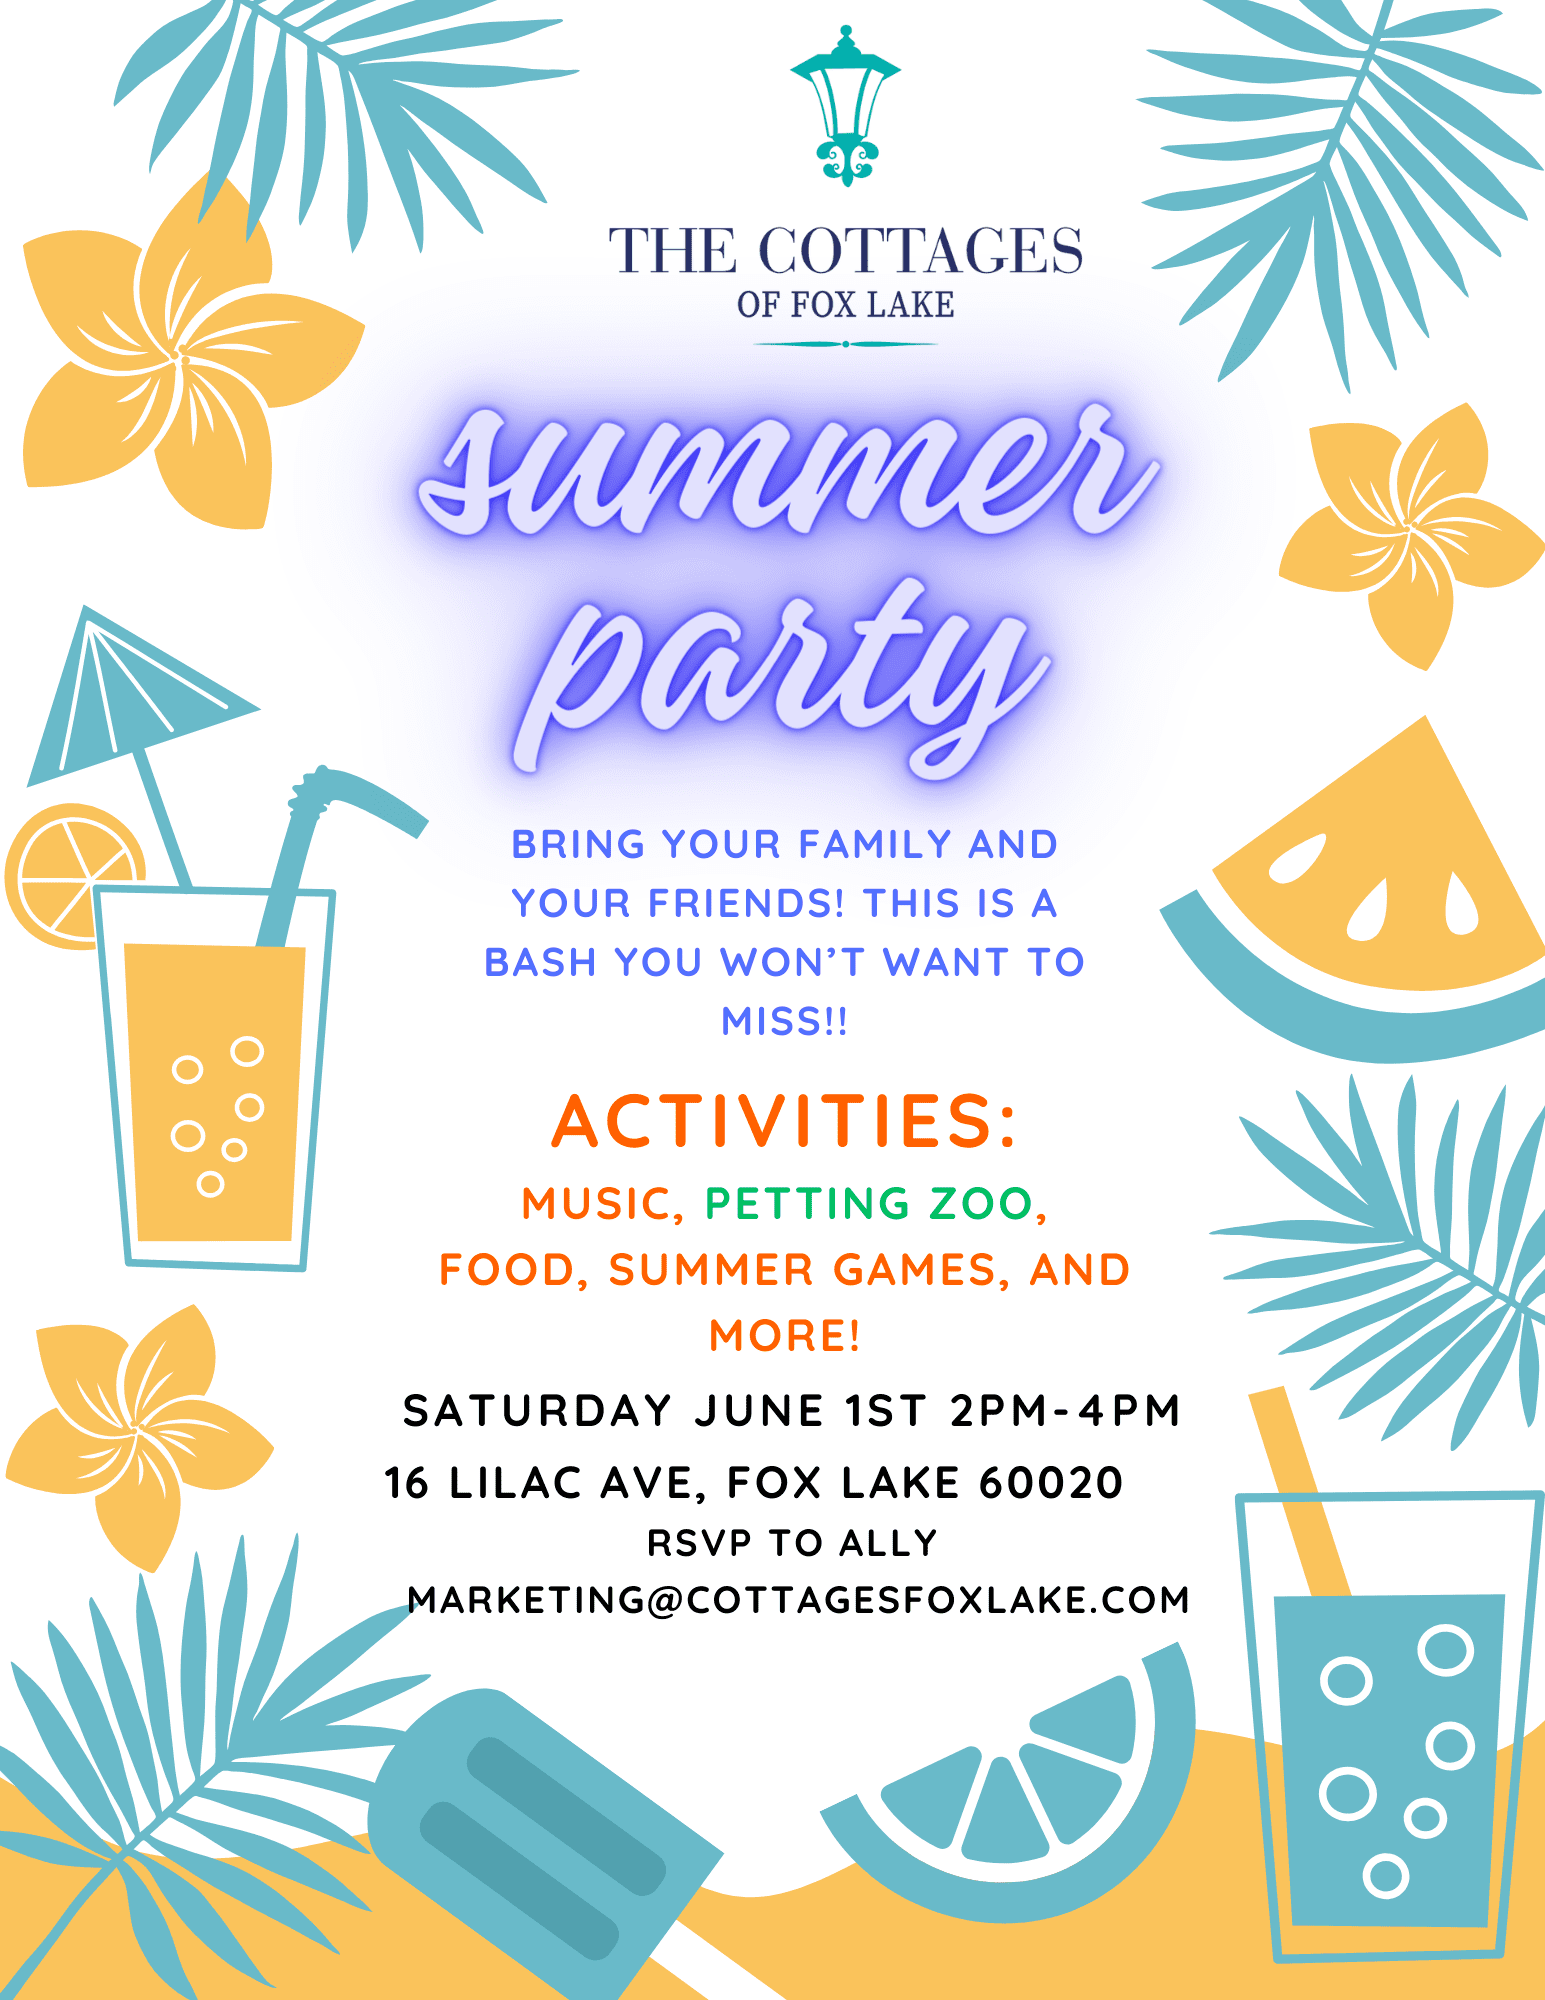 Cottages of Fox Lake - Assisted Living and Memory Care - Summer Party